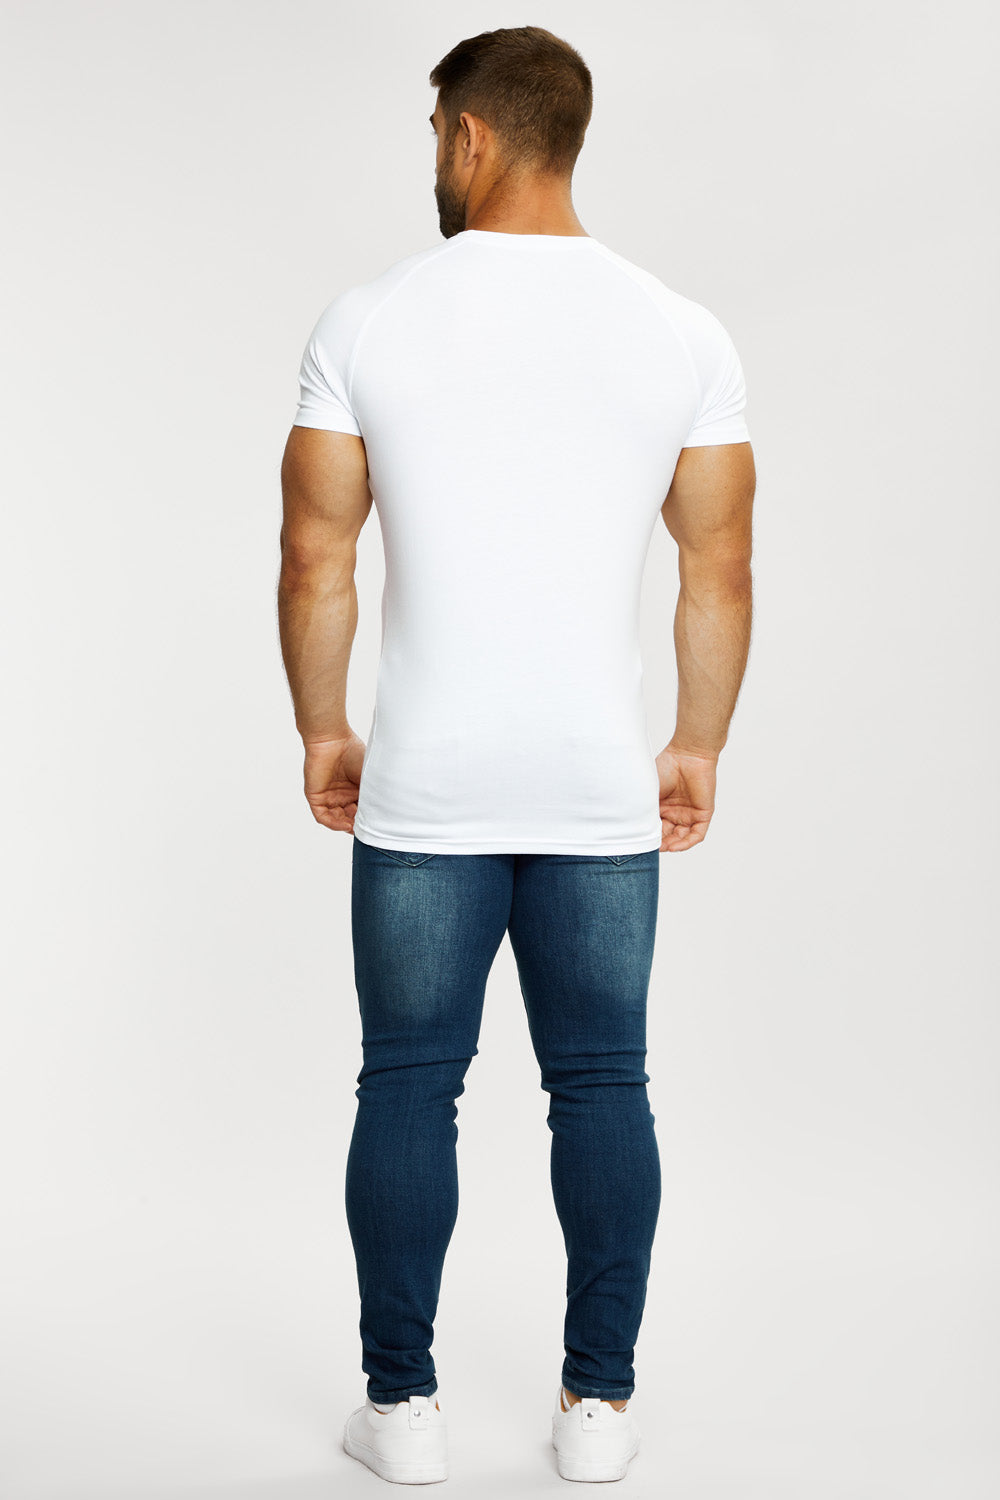 Athletic Fit Jeans in Dark Blue - TAILORED ATHLETE - USA